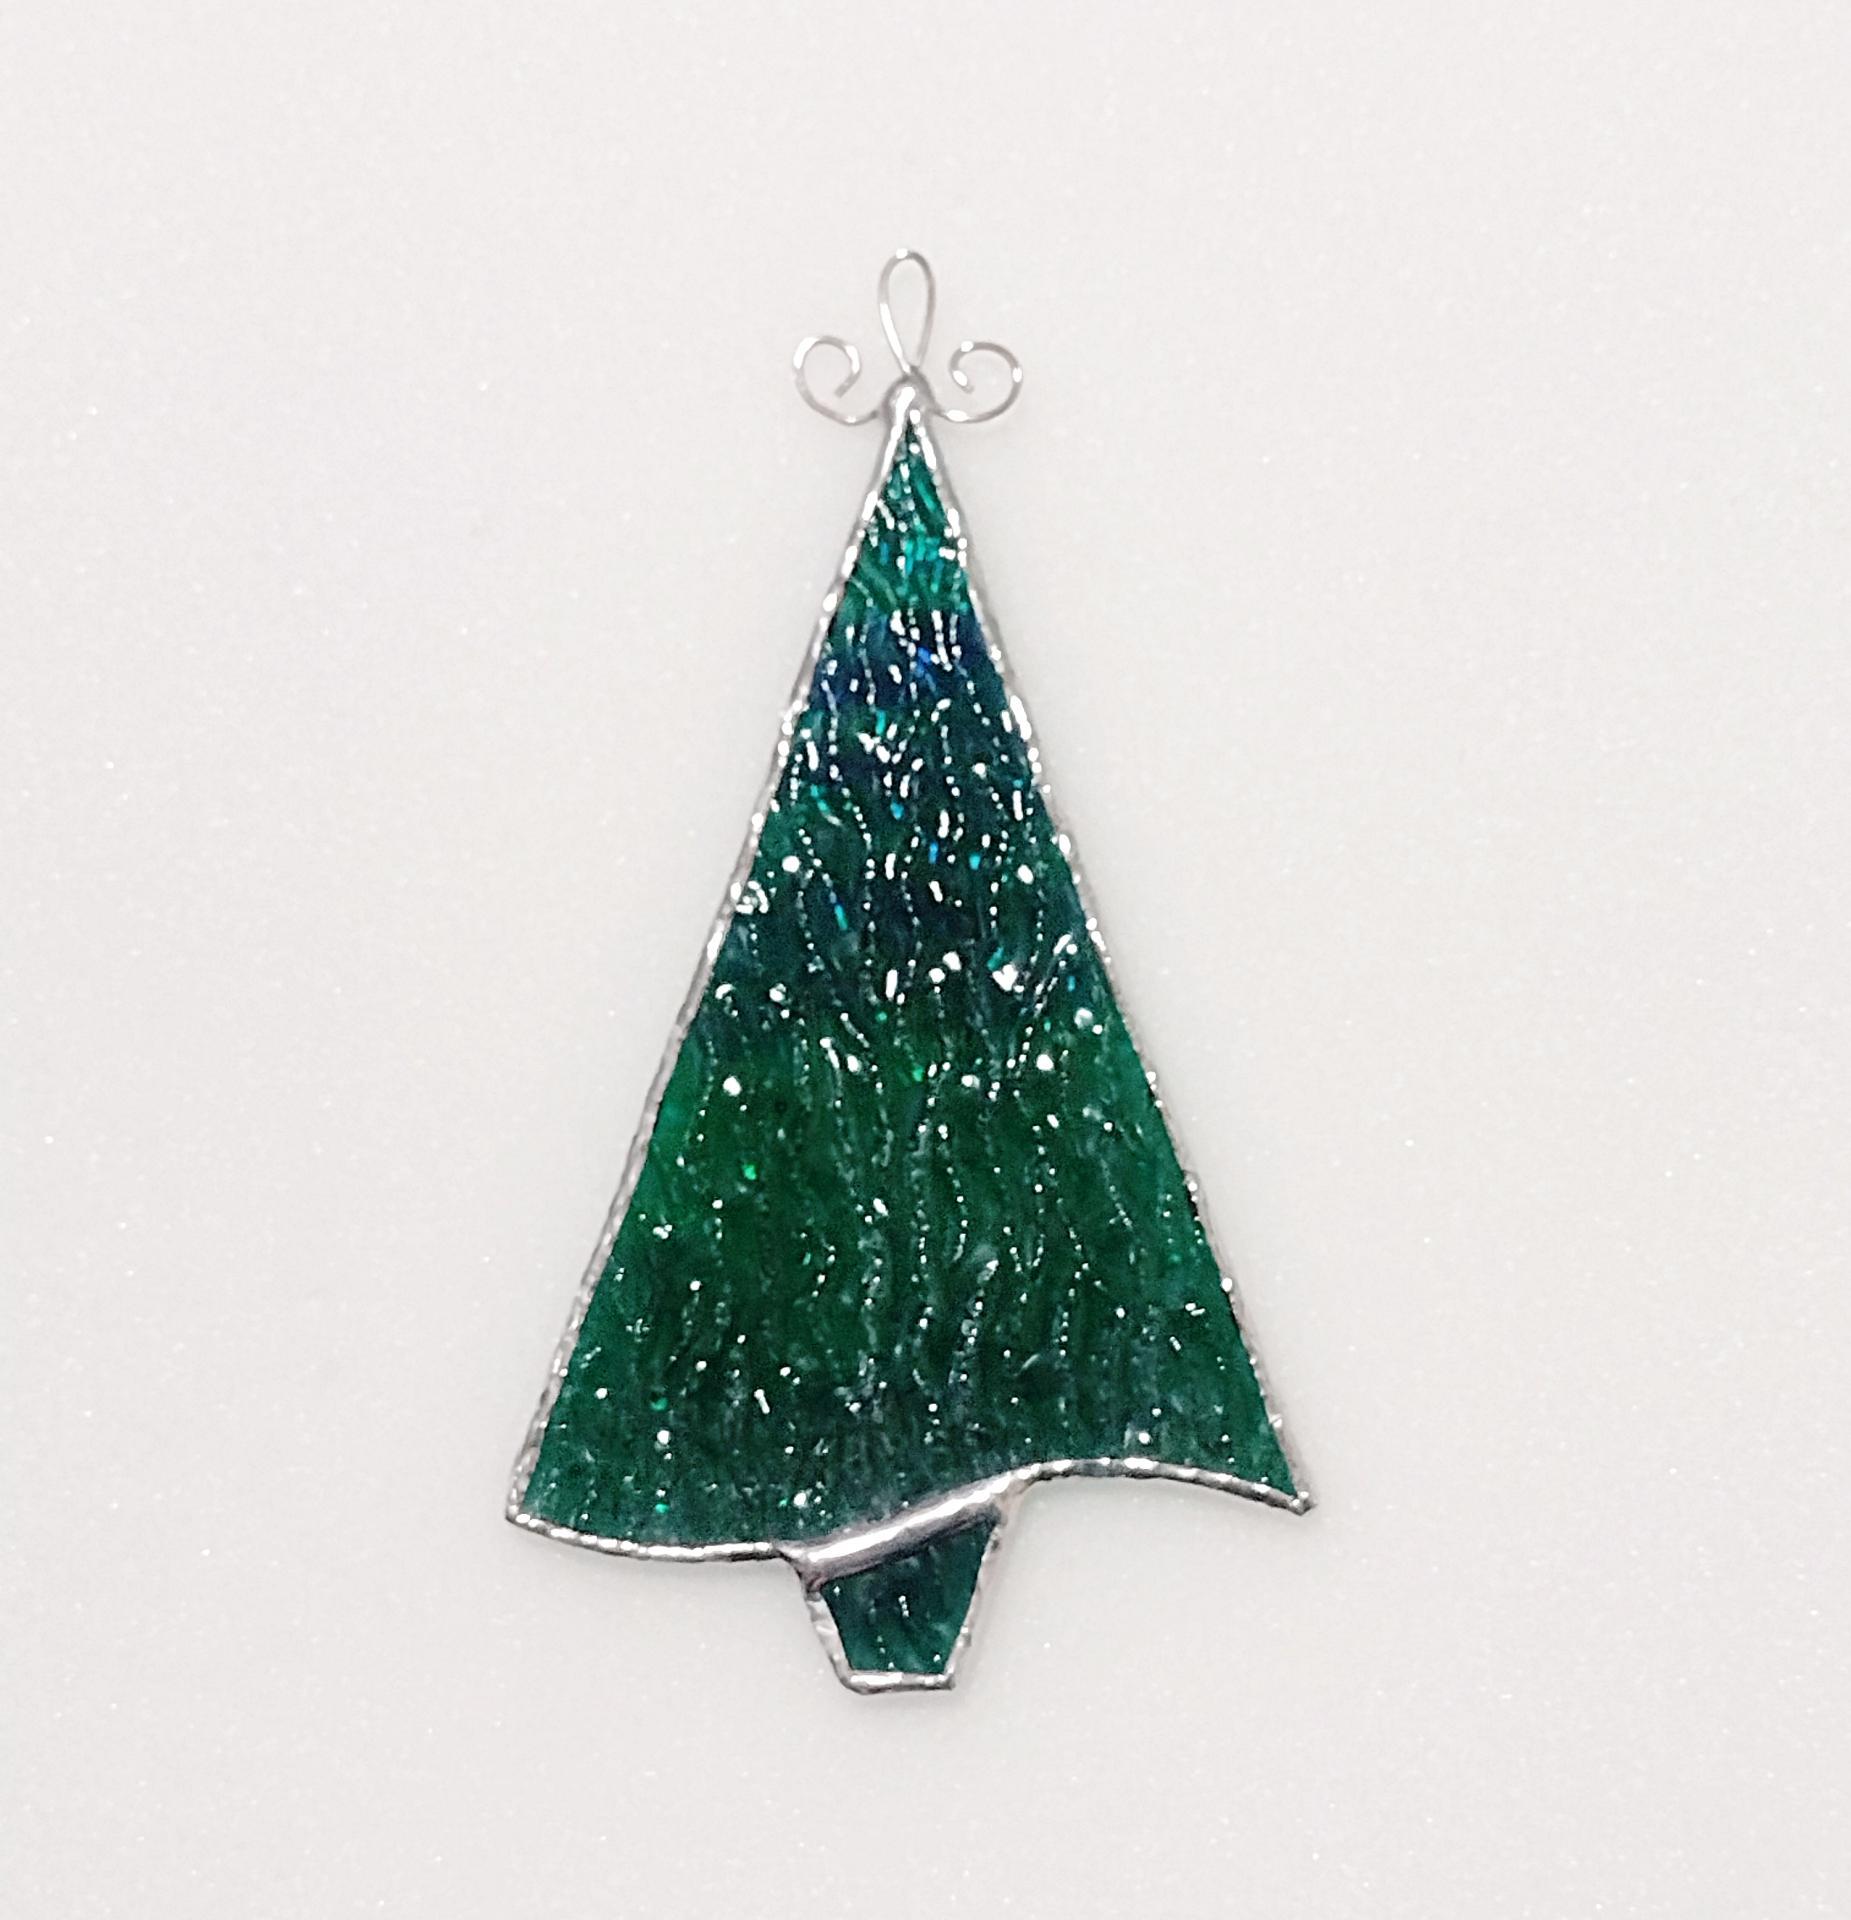 Stained Glass Christmas Tree Suncatcher / Ornament, Green Iridescent Cathedral Glass